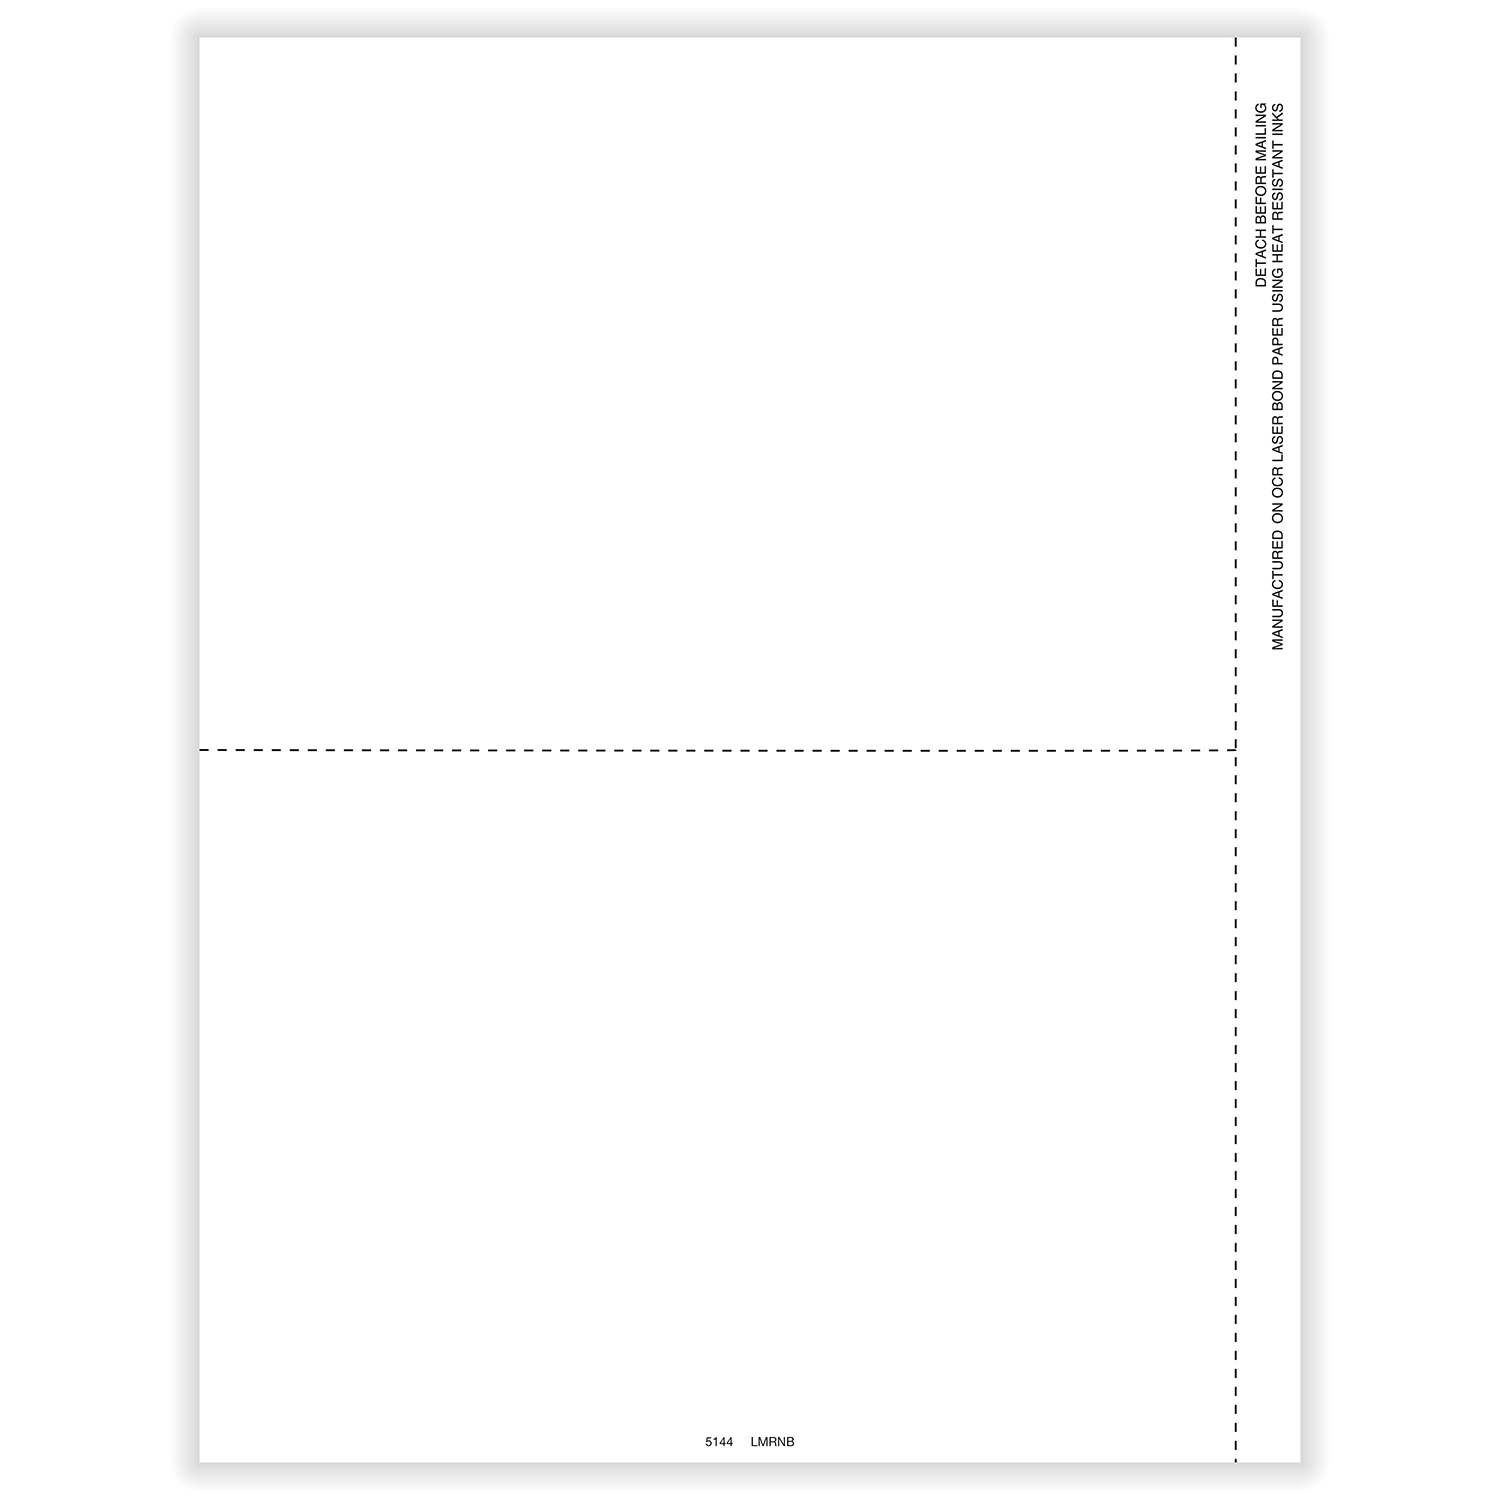 1099-R Laser Blank 2-Up with 1 Vertical & 1 Center Perforation (100 Pack)	